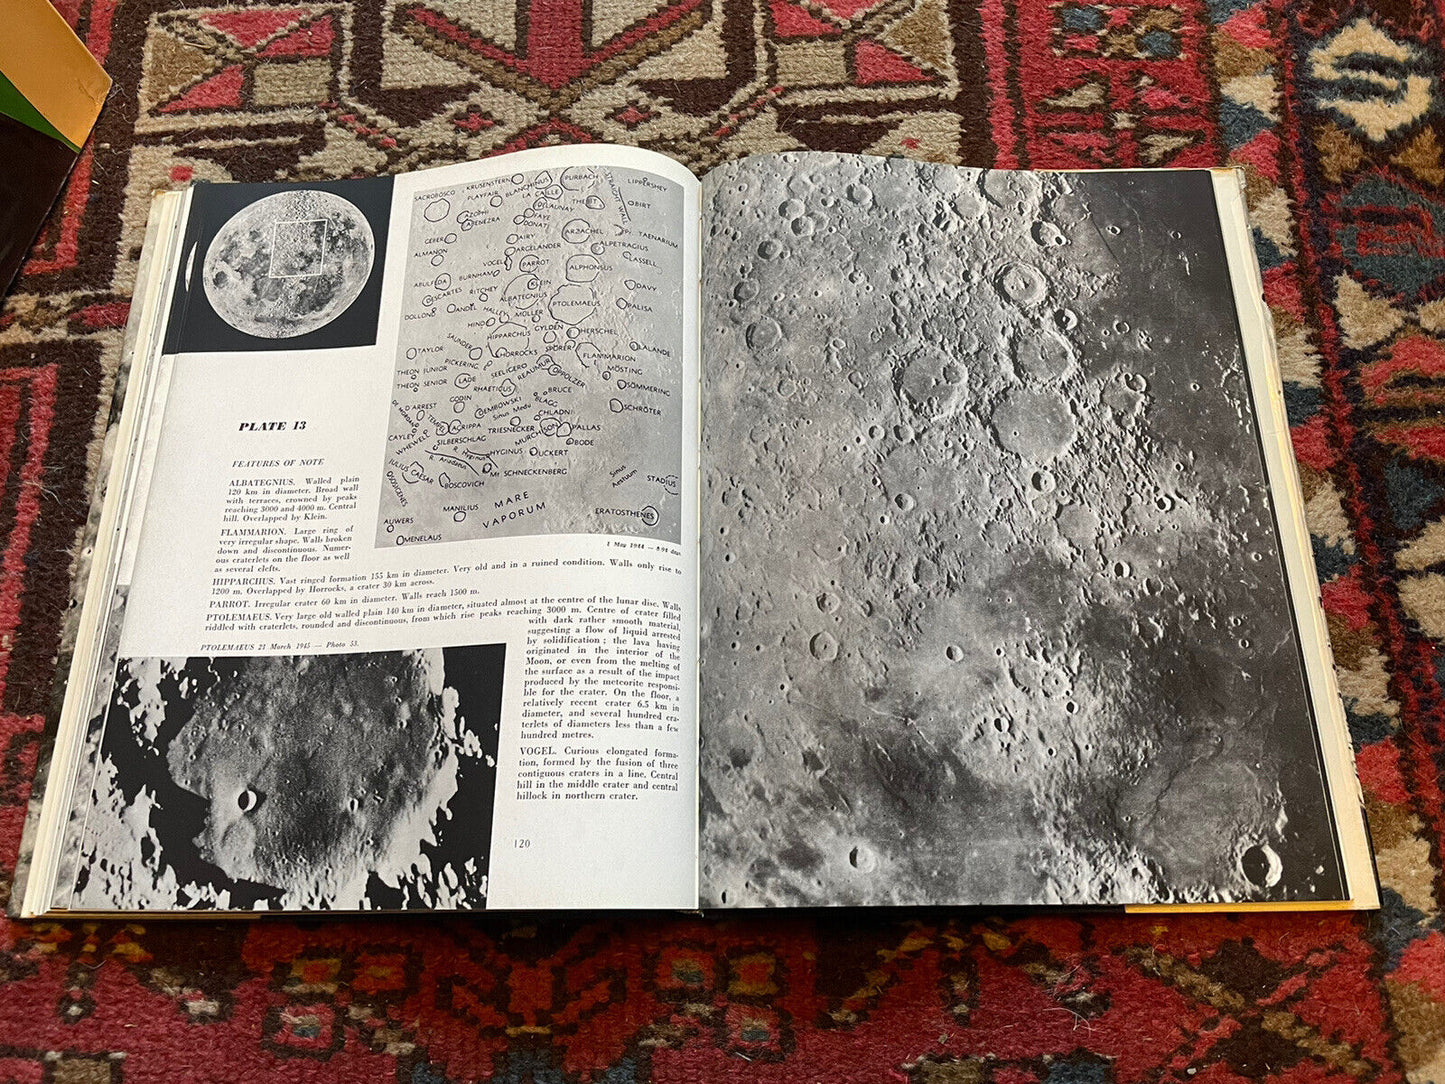 ATLAS OF THE MOON : Vincent de Callatay : PHASES ROTATION TIDES FACES Astronomy